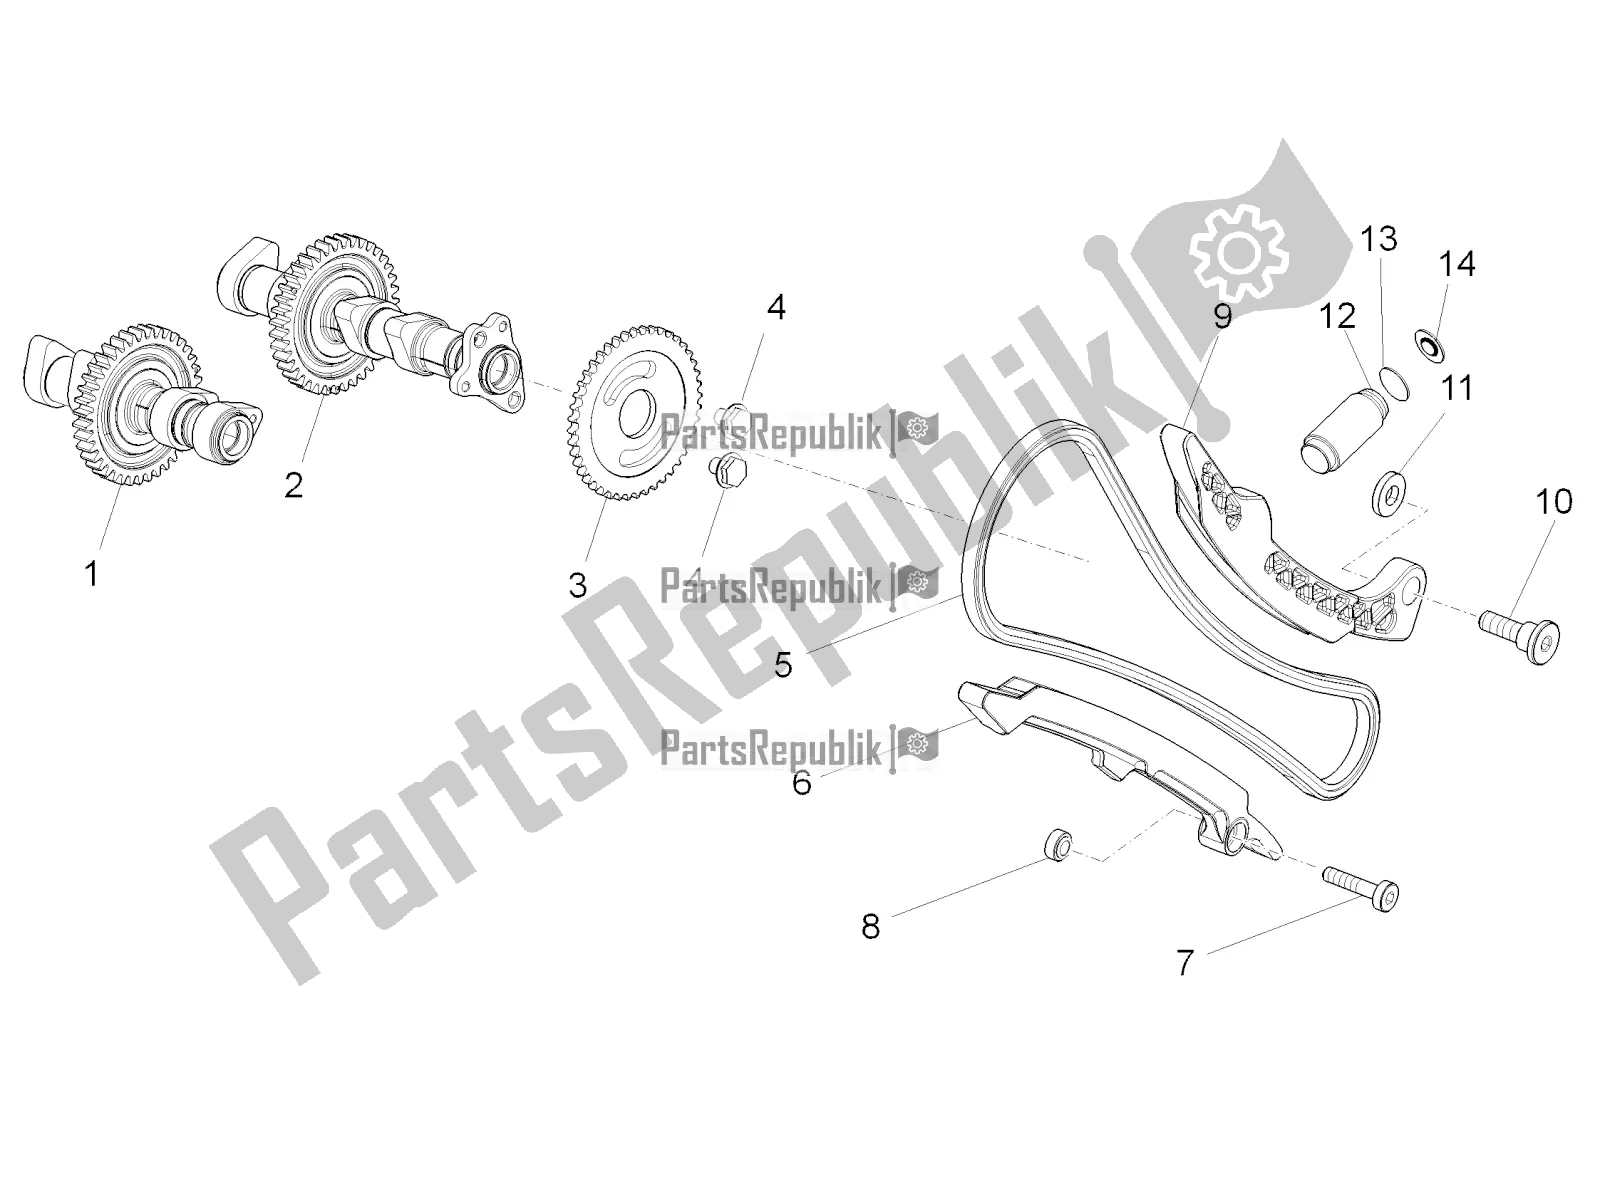 All parts for the Front Cylinder Timing System of the Aprilia Tuono V4 1100 RR ZD4 KG 2018